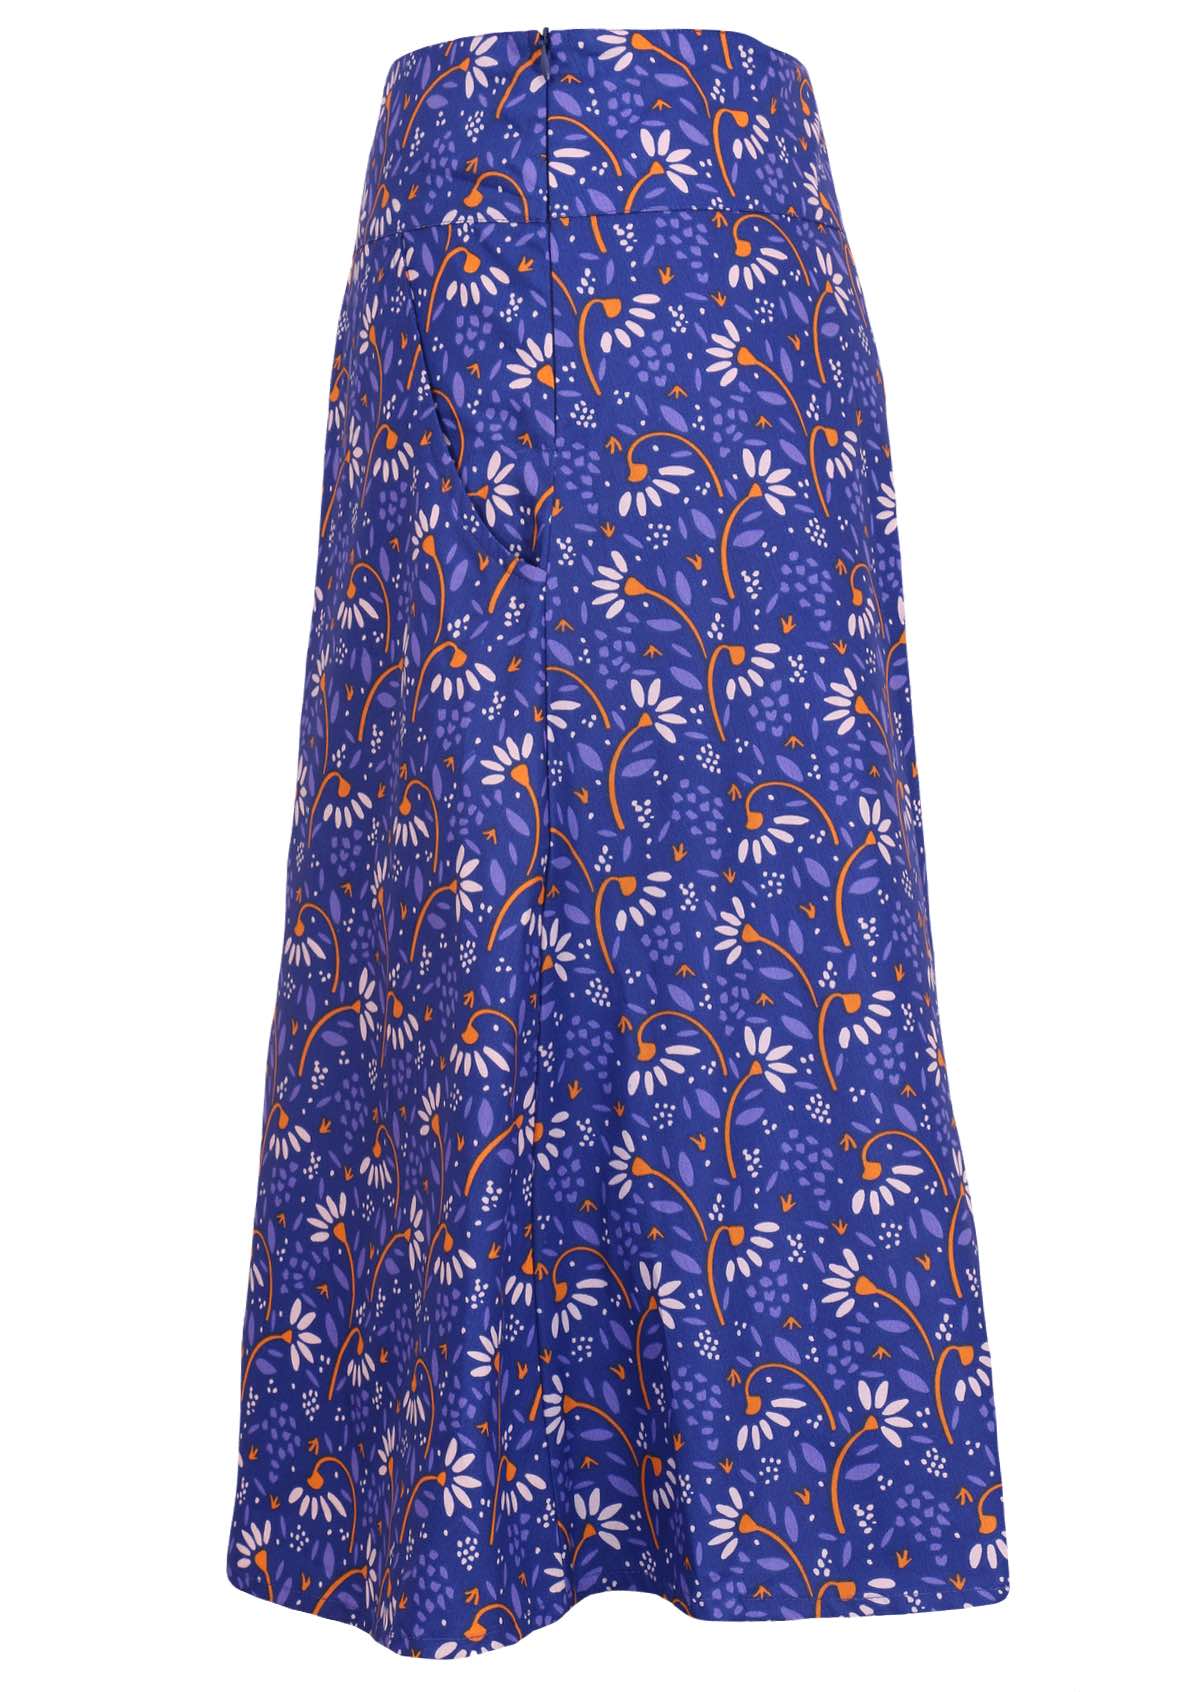 Funky floral print skirt side mannequin photo